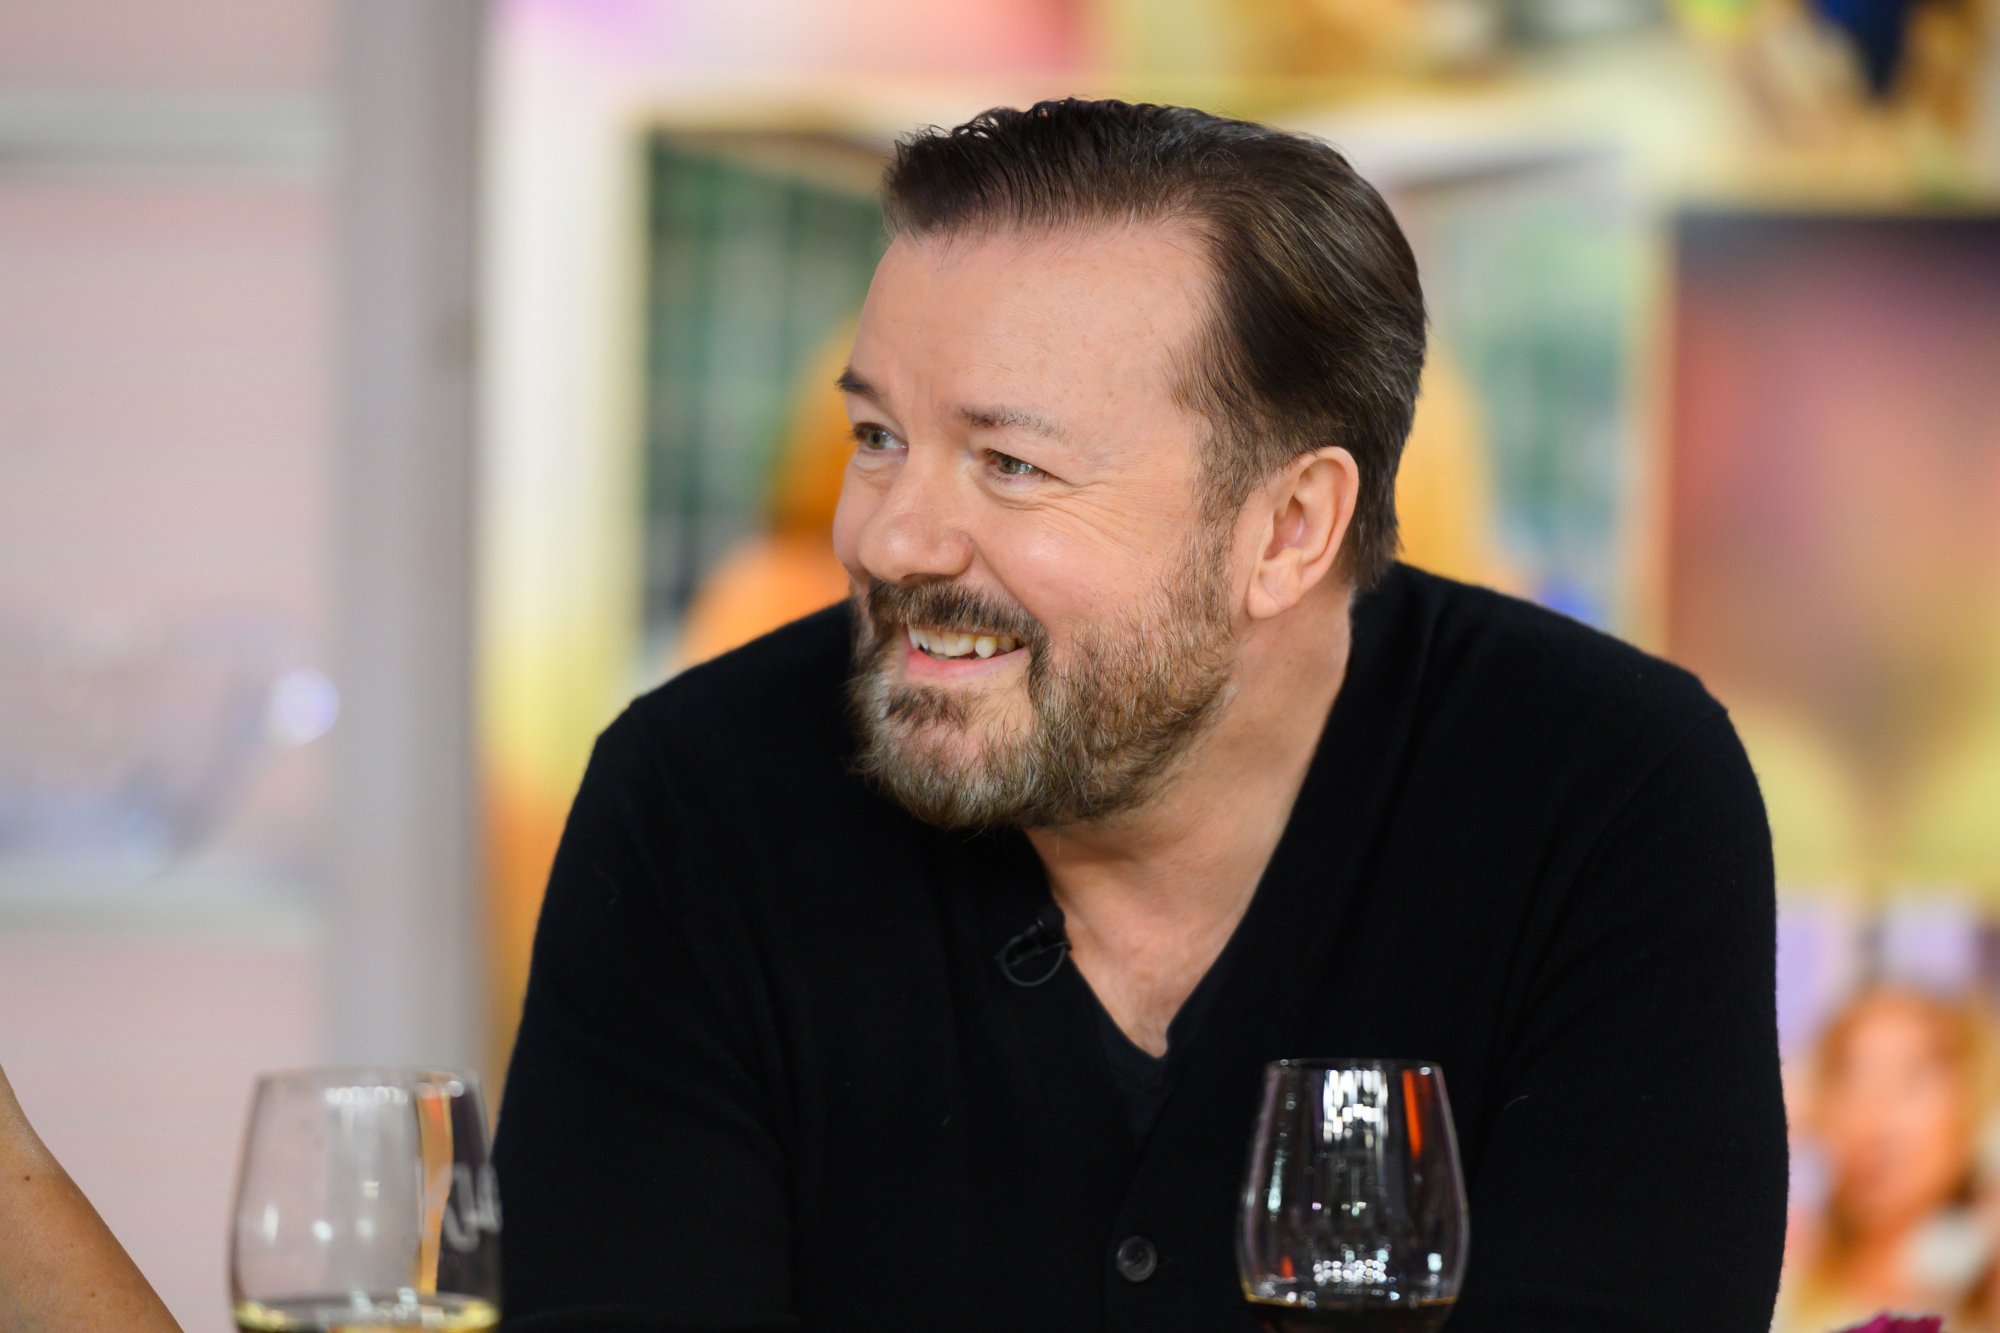 'SuperNature' comedian Ricky Gervais smiling and wearing a black shirt with a glass of wine in front of him